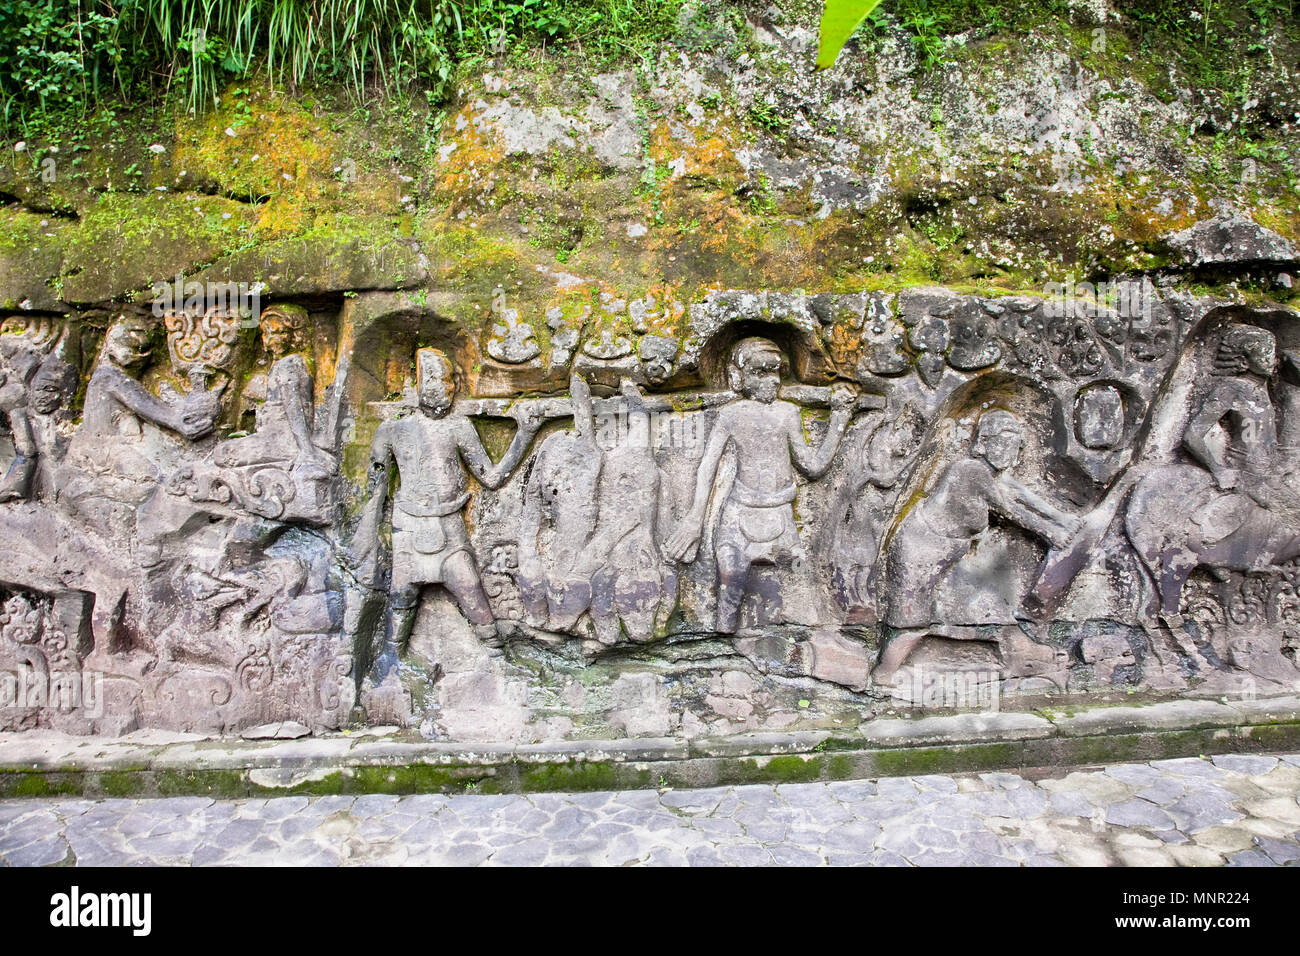 Yeh Pulu - Famous carved cliff face, Ubud, Bali, Indonesia Stock Photo